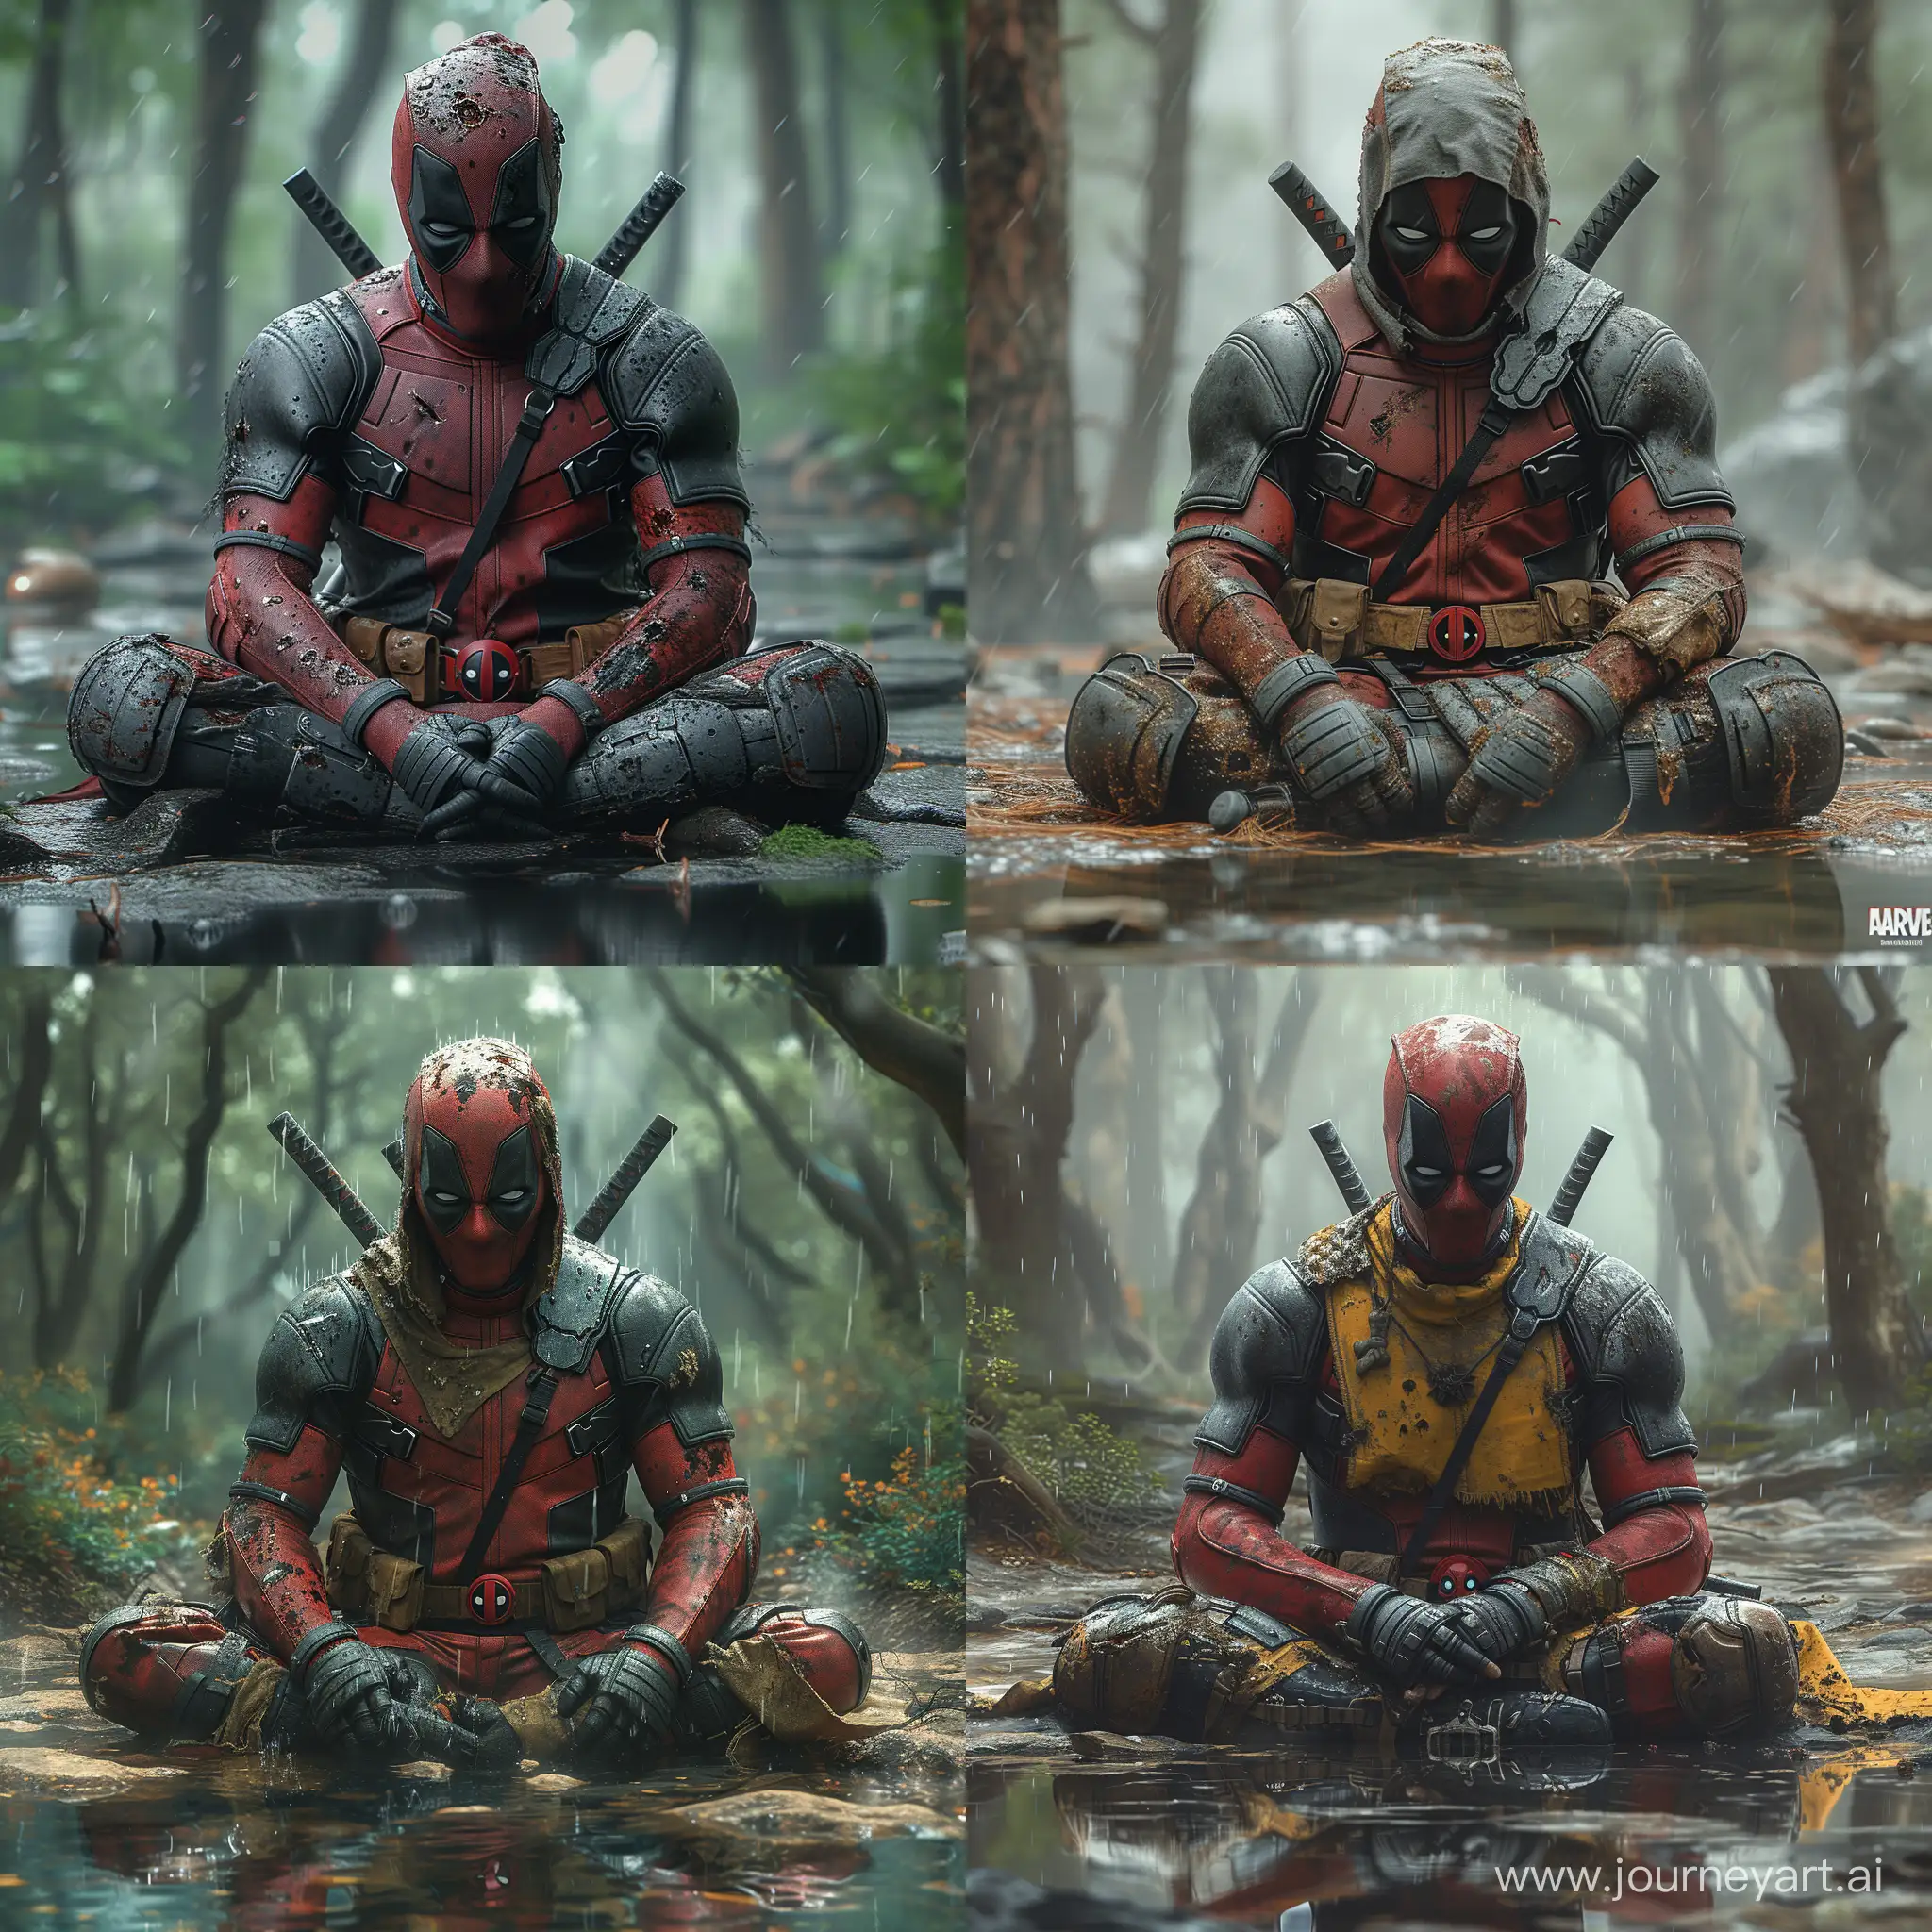 Wounded-Medieval-Deadpool-Rests-in-Forest-Amidst-Storm